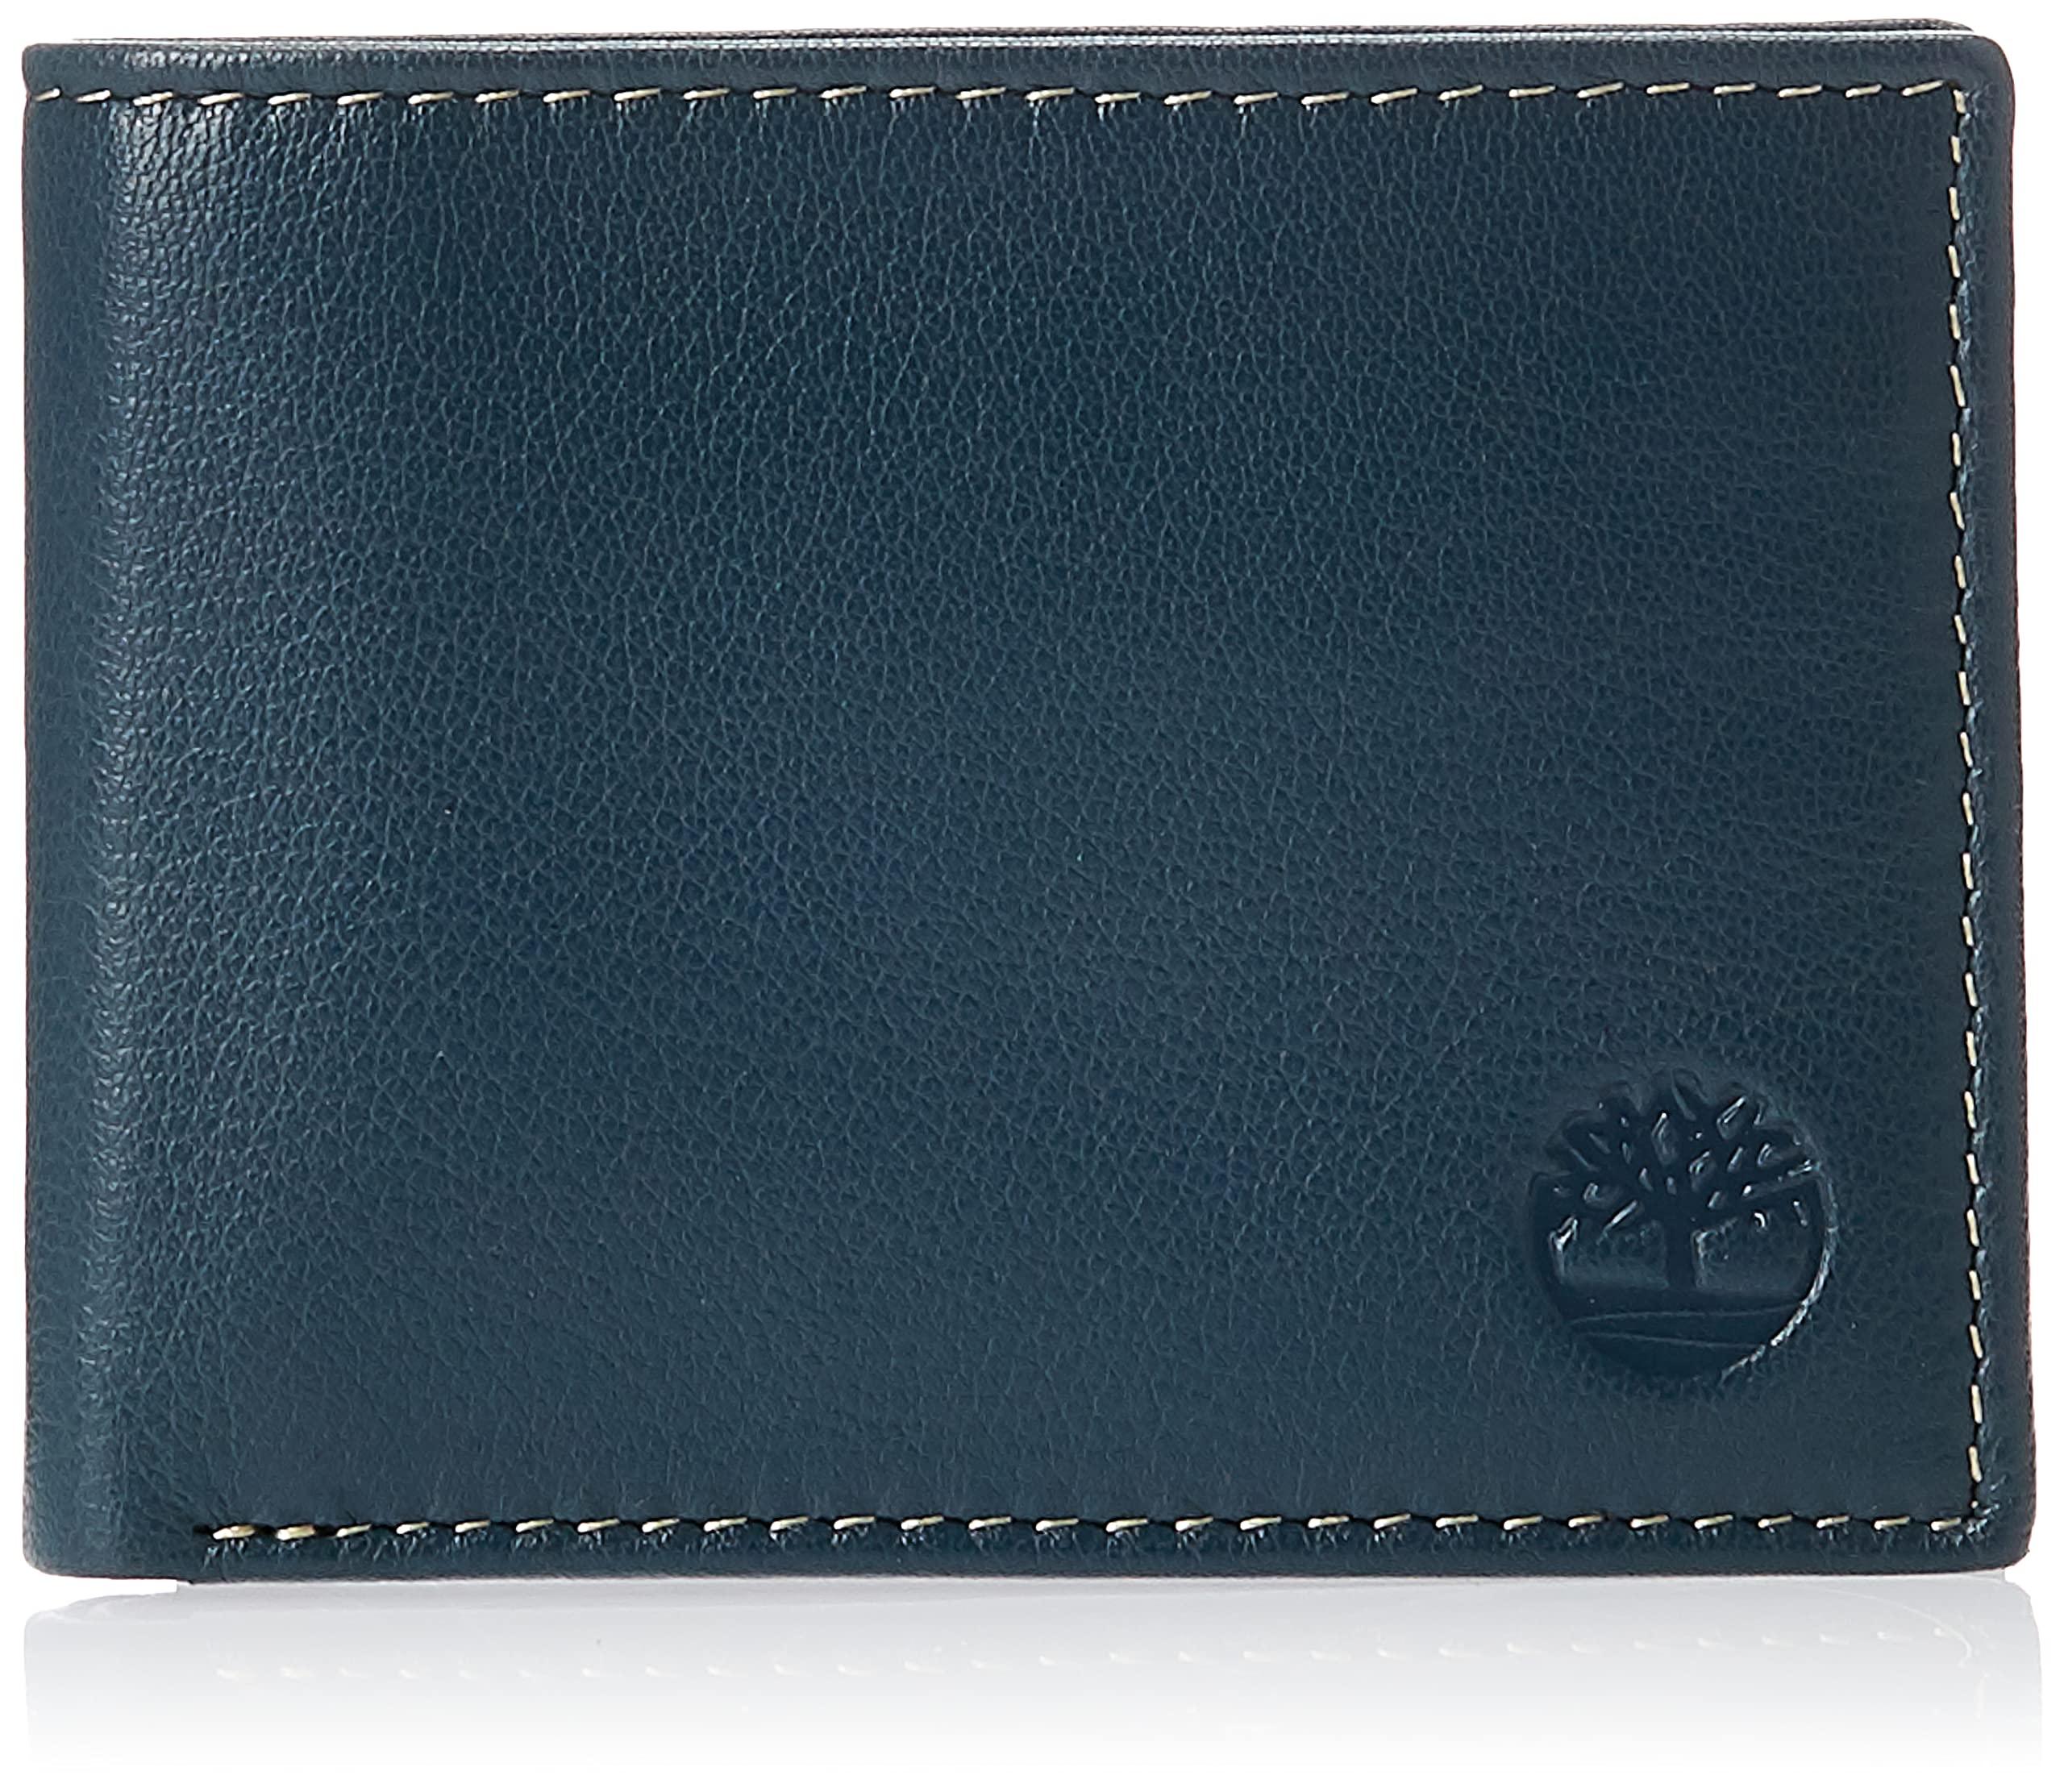 Timberland Blix Slimfold Leather Wallets in Blue for Men - Save 26% - Lyst